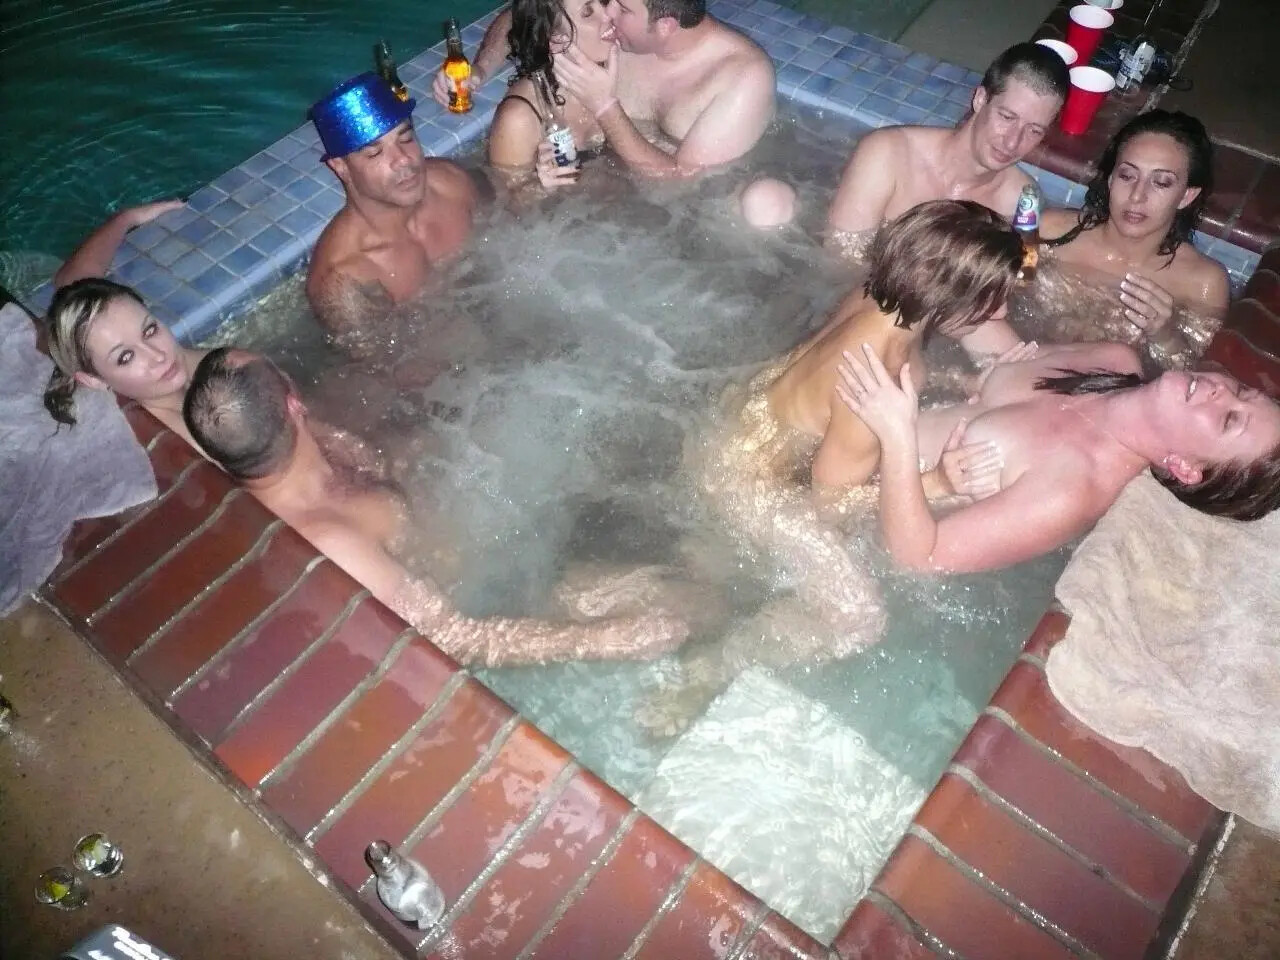 Our sex party? Ive got some pics! - 02-amateur-swinger-pics-from-the-hot-tub Porn picture